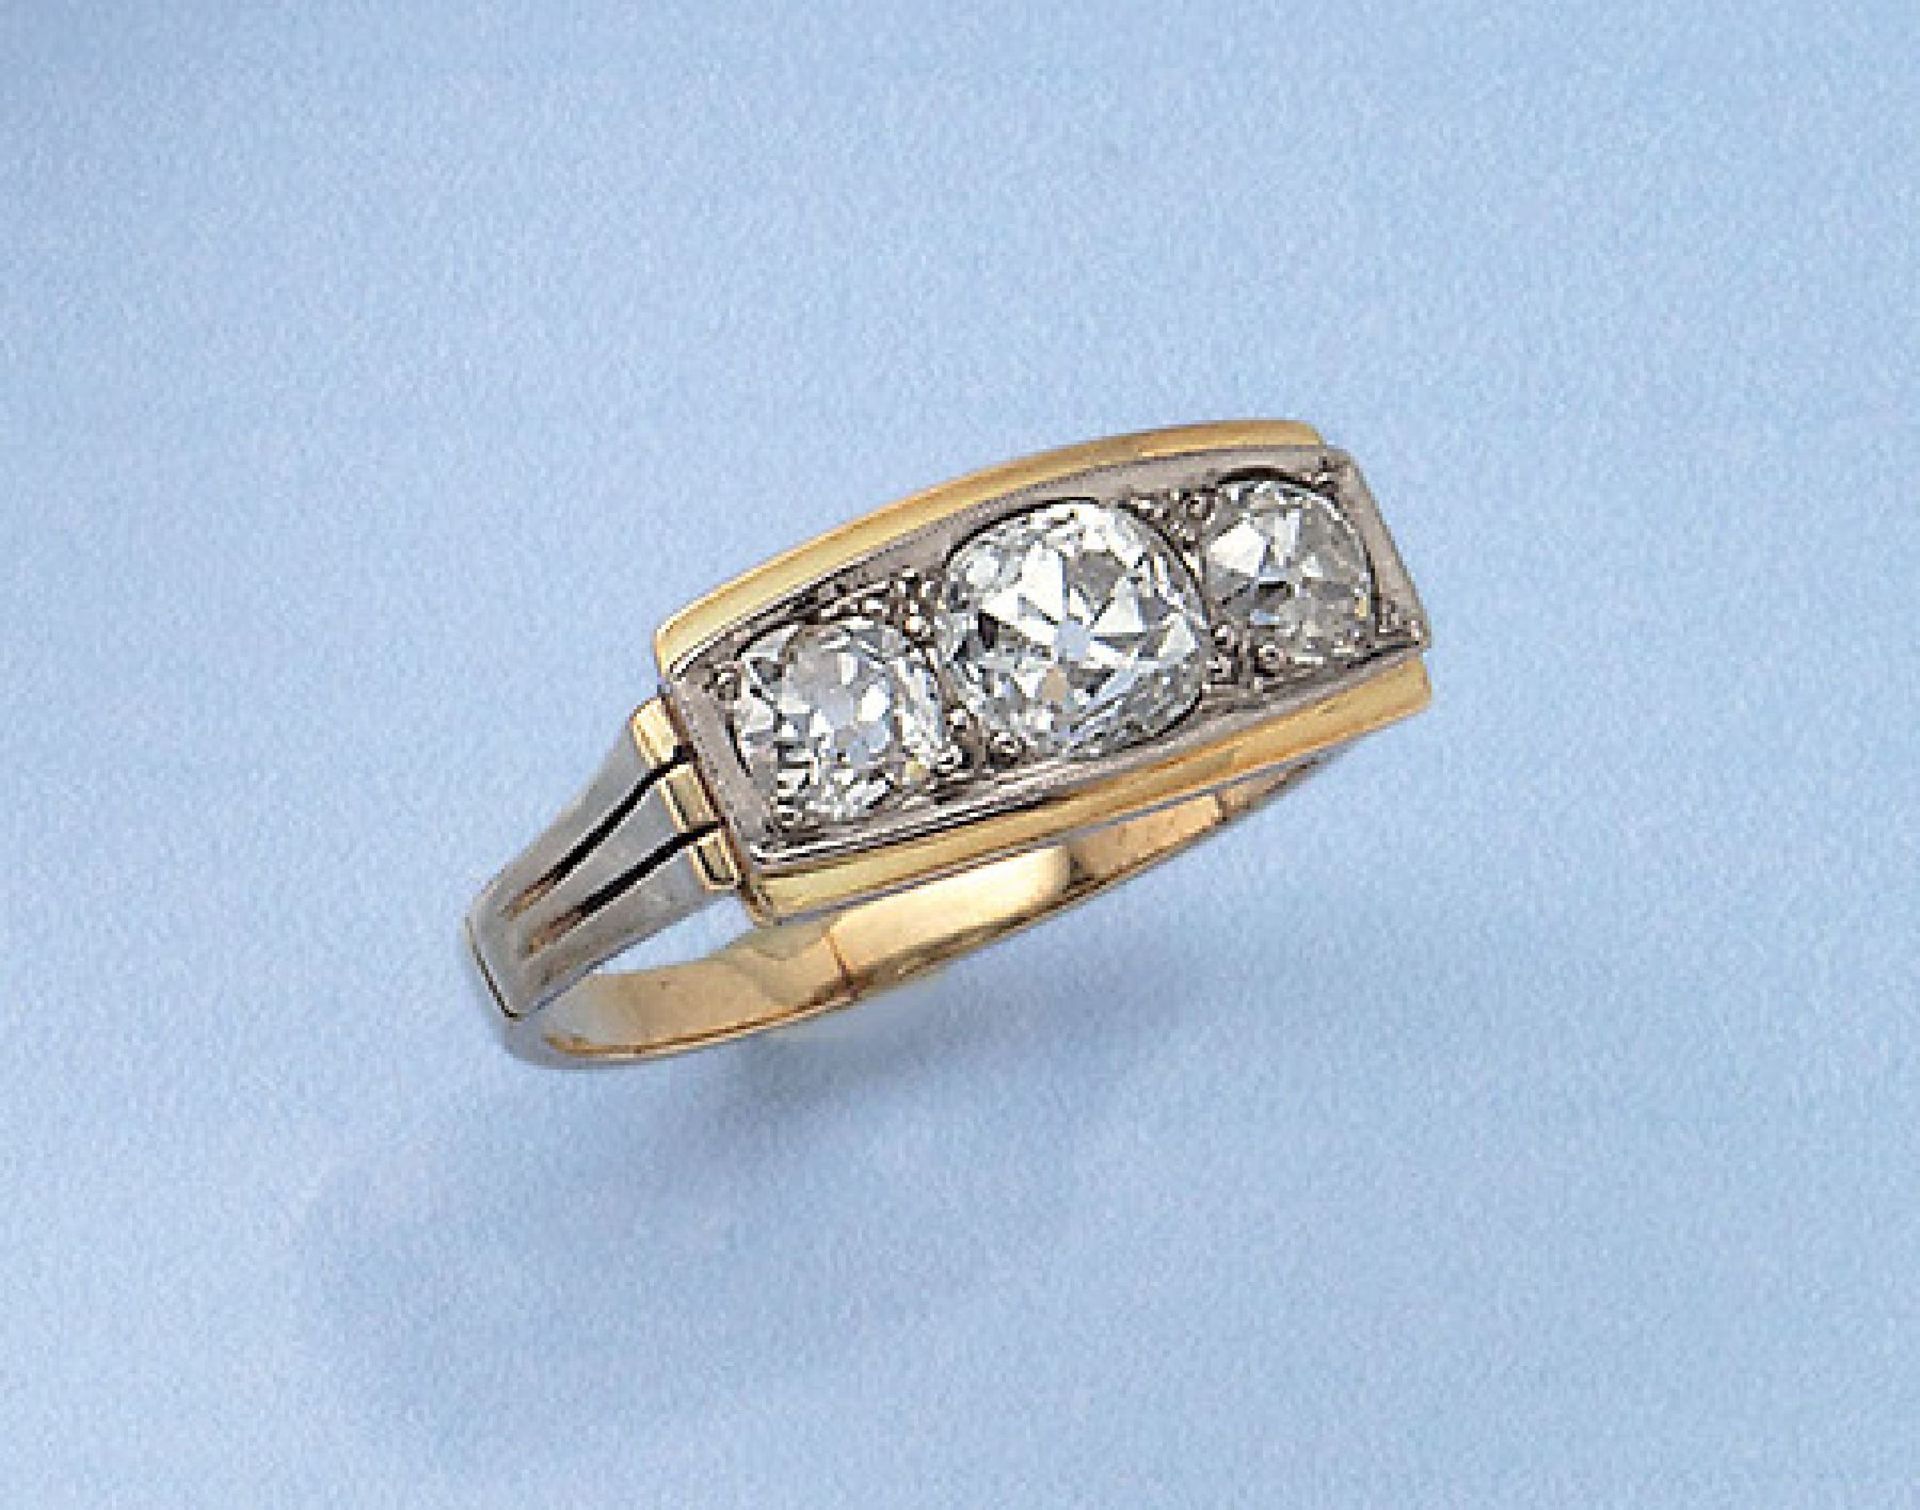 14 kt gold Art-Deco ring with diamonds, ca. 1920 YG 585/000, 3 old cut diamonds total 1.15ct